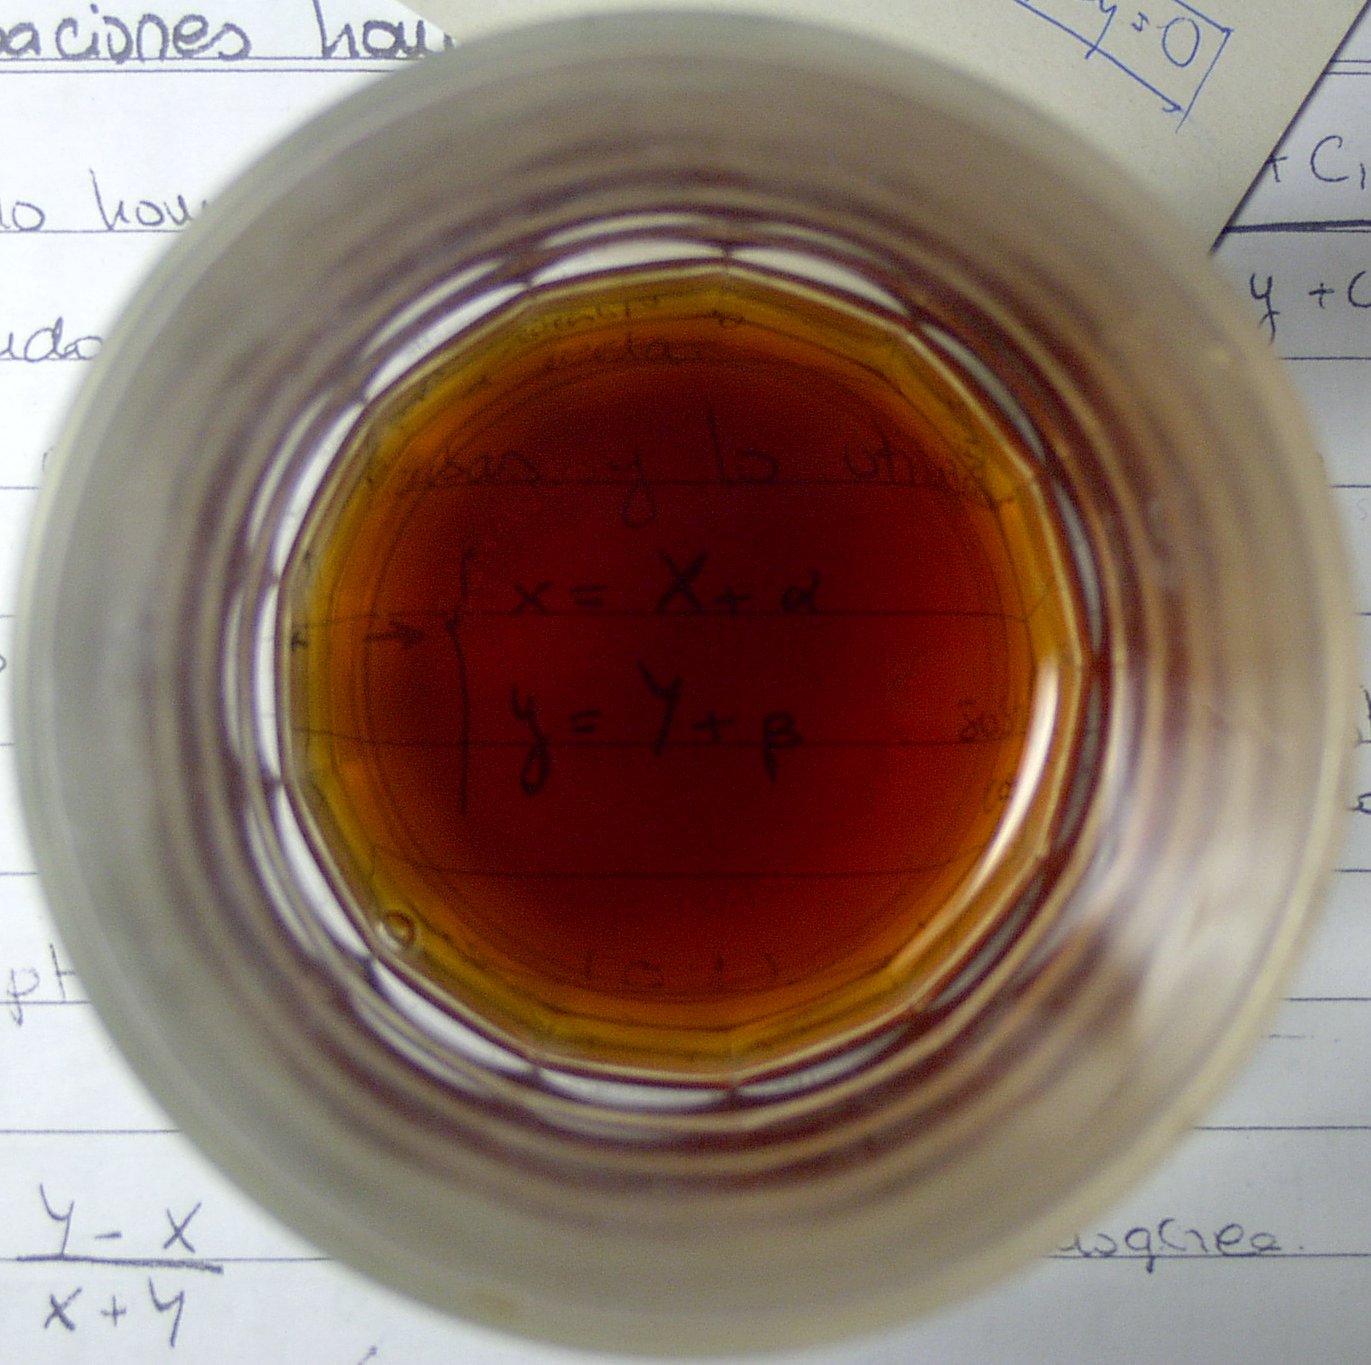 a glass with brown liquid inside of it next to papers